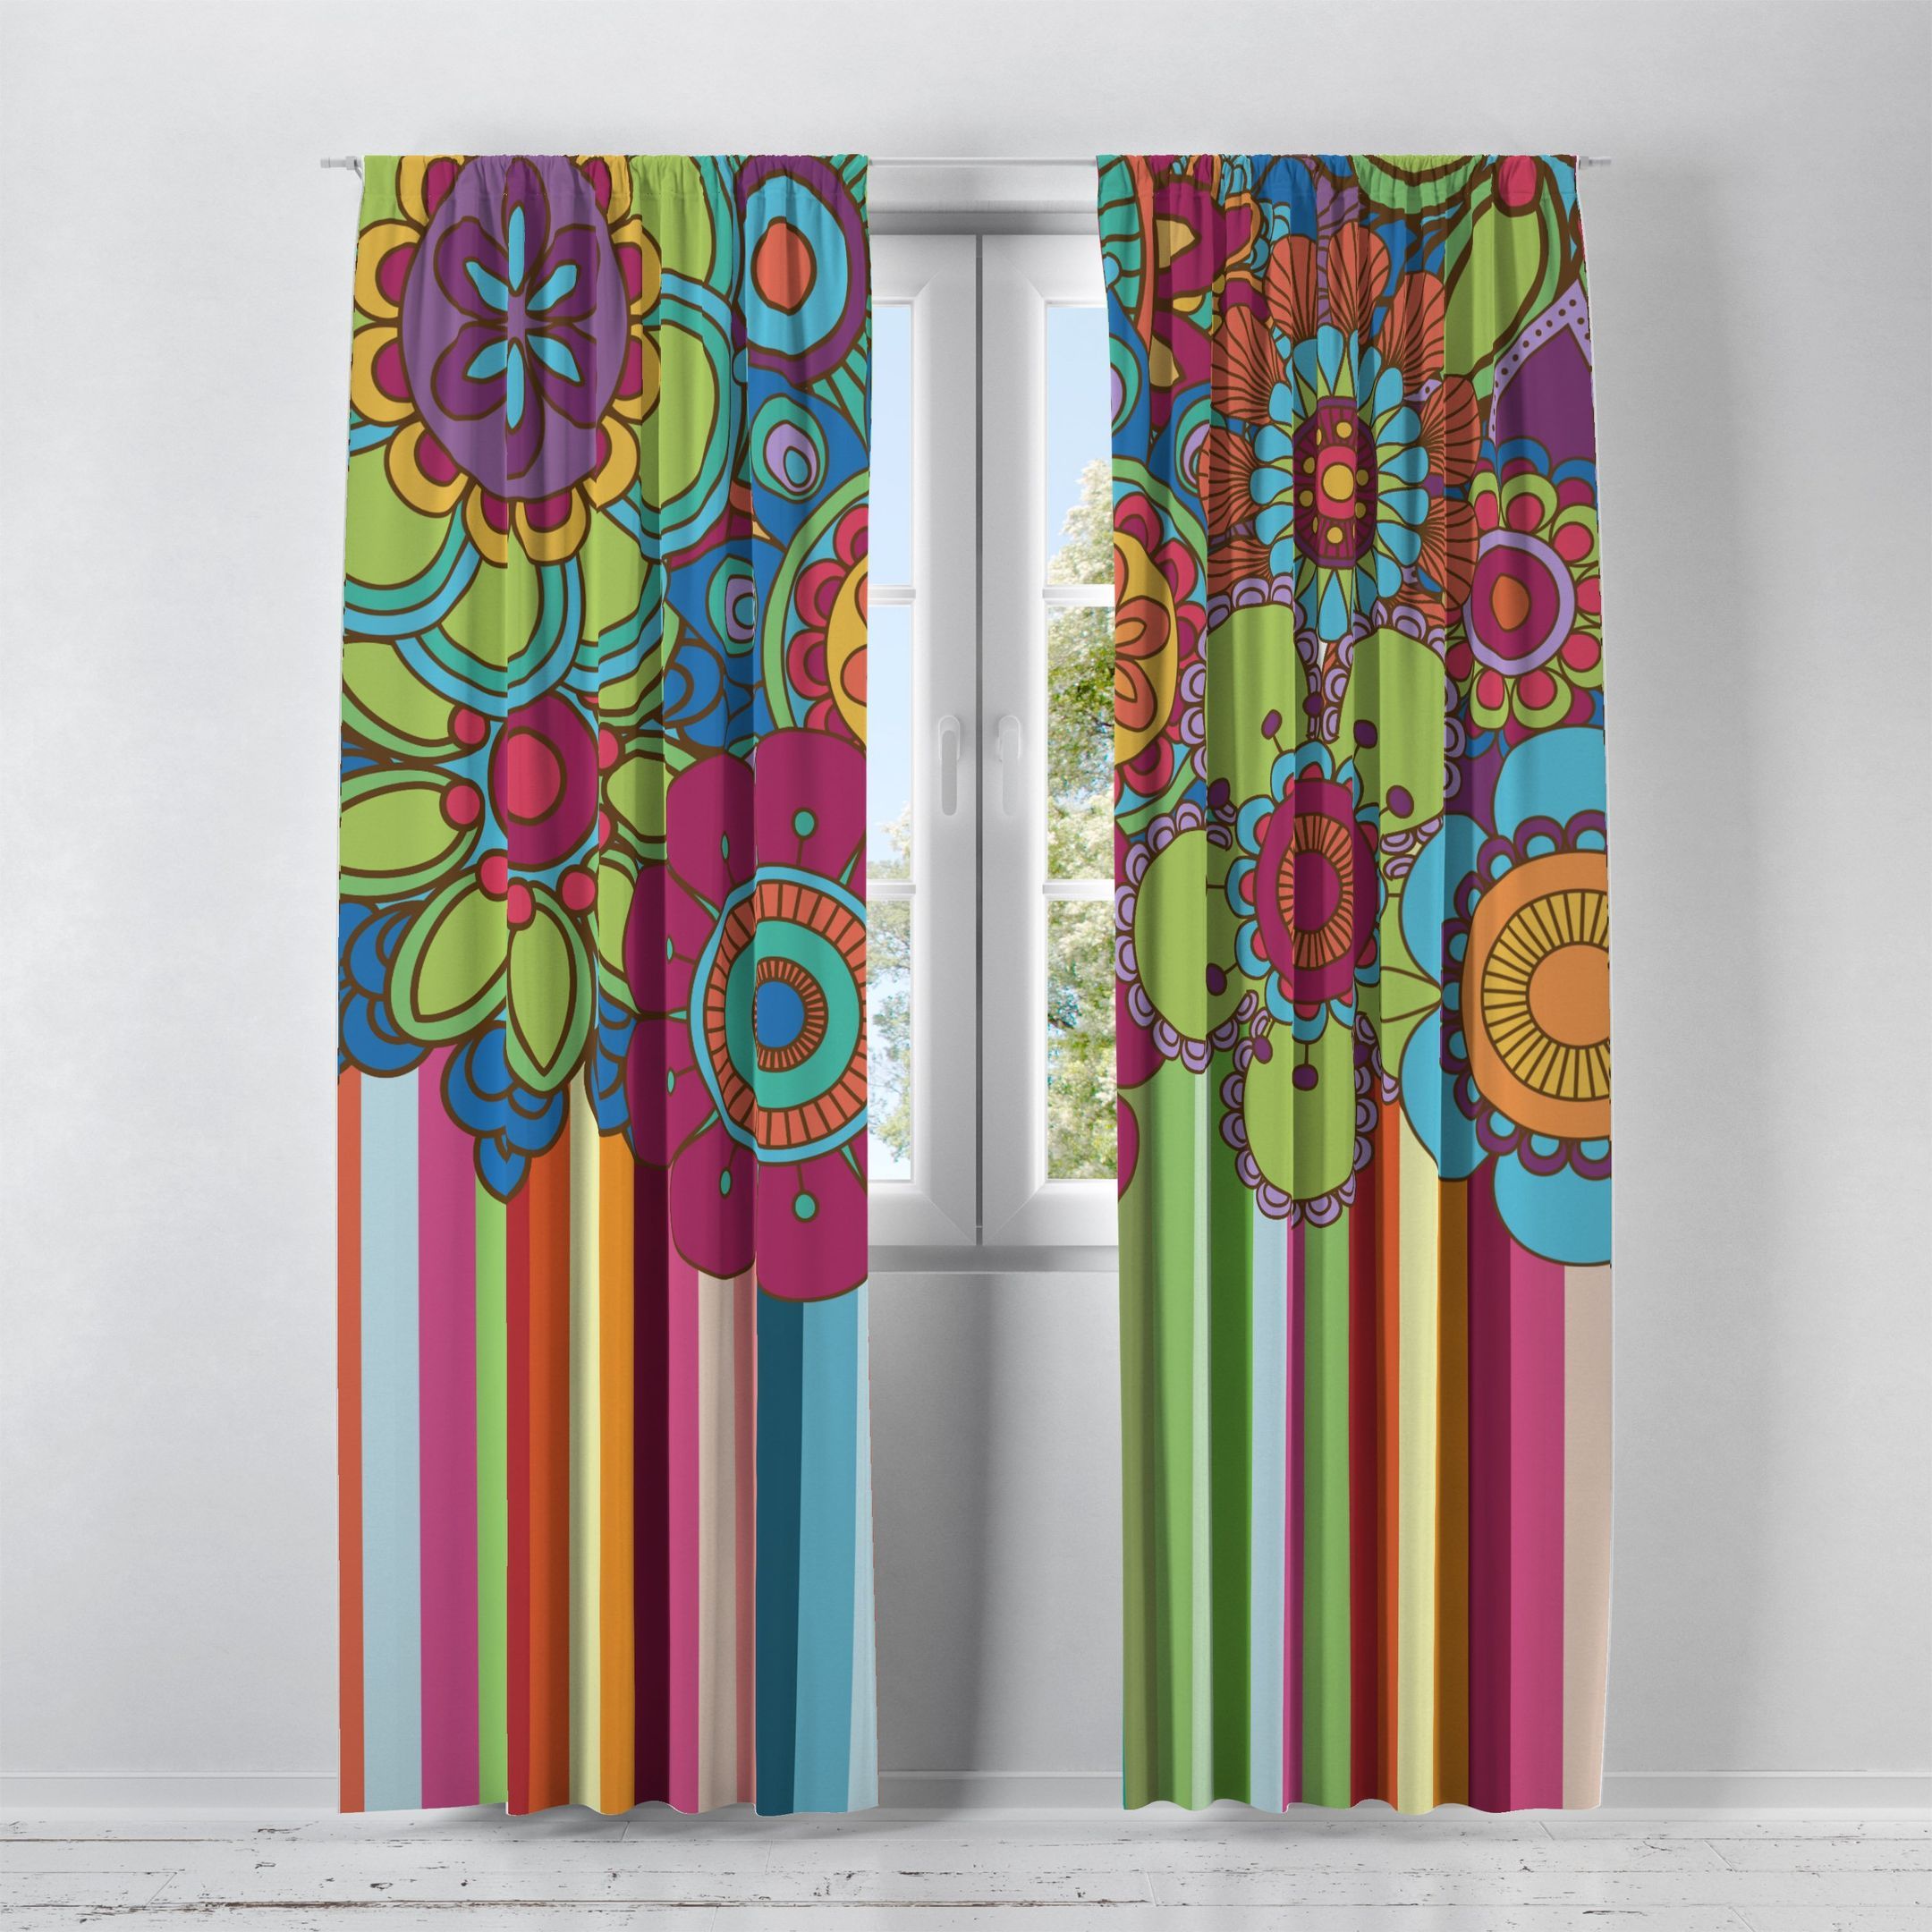 Appealing Hippie Wildflower Printed Window Curtains Home Decor